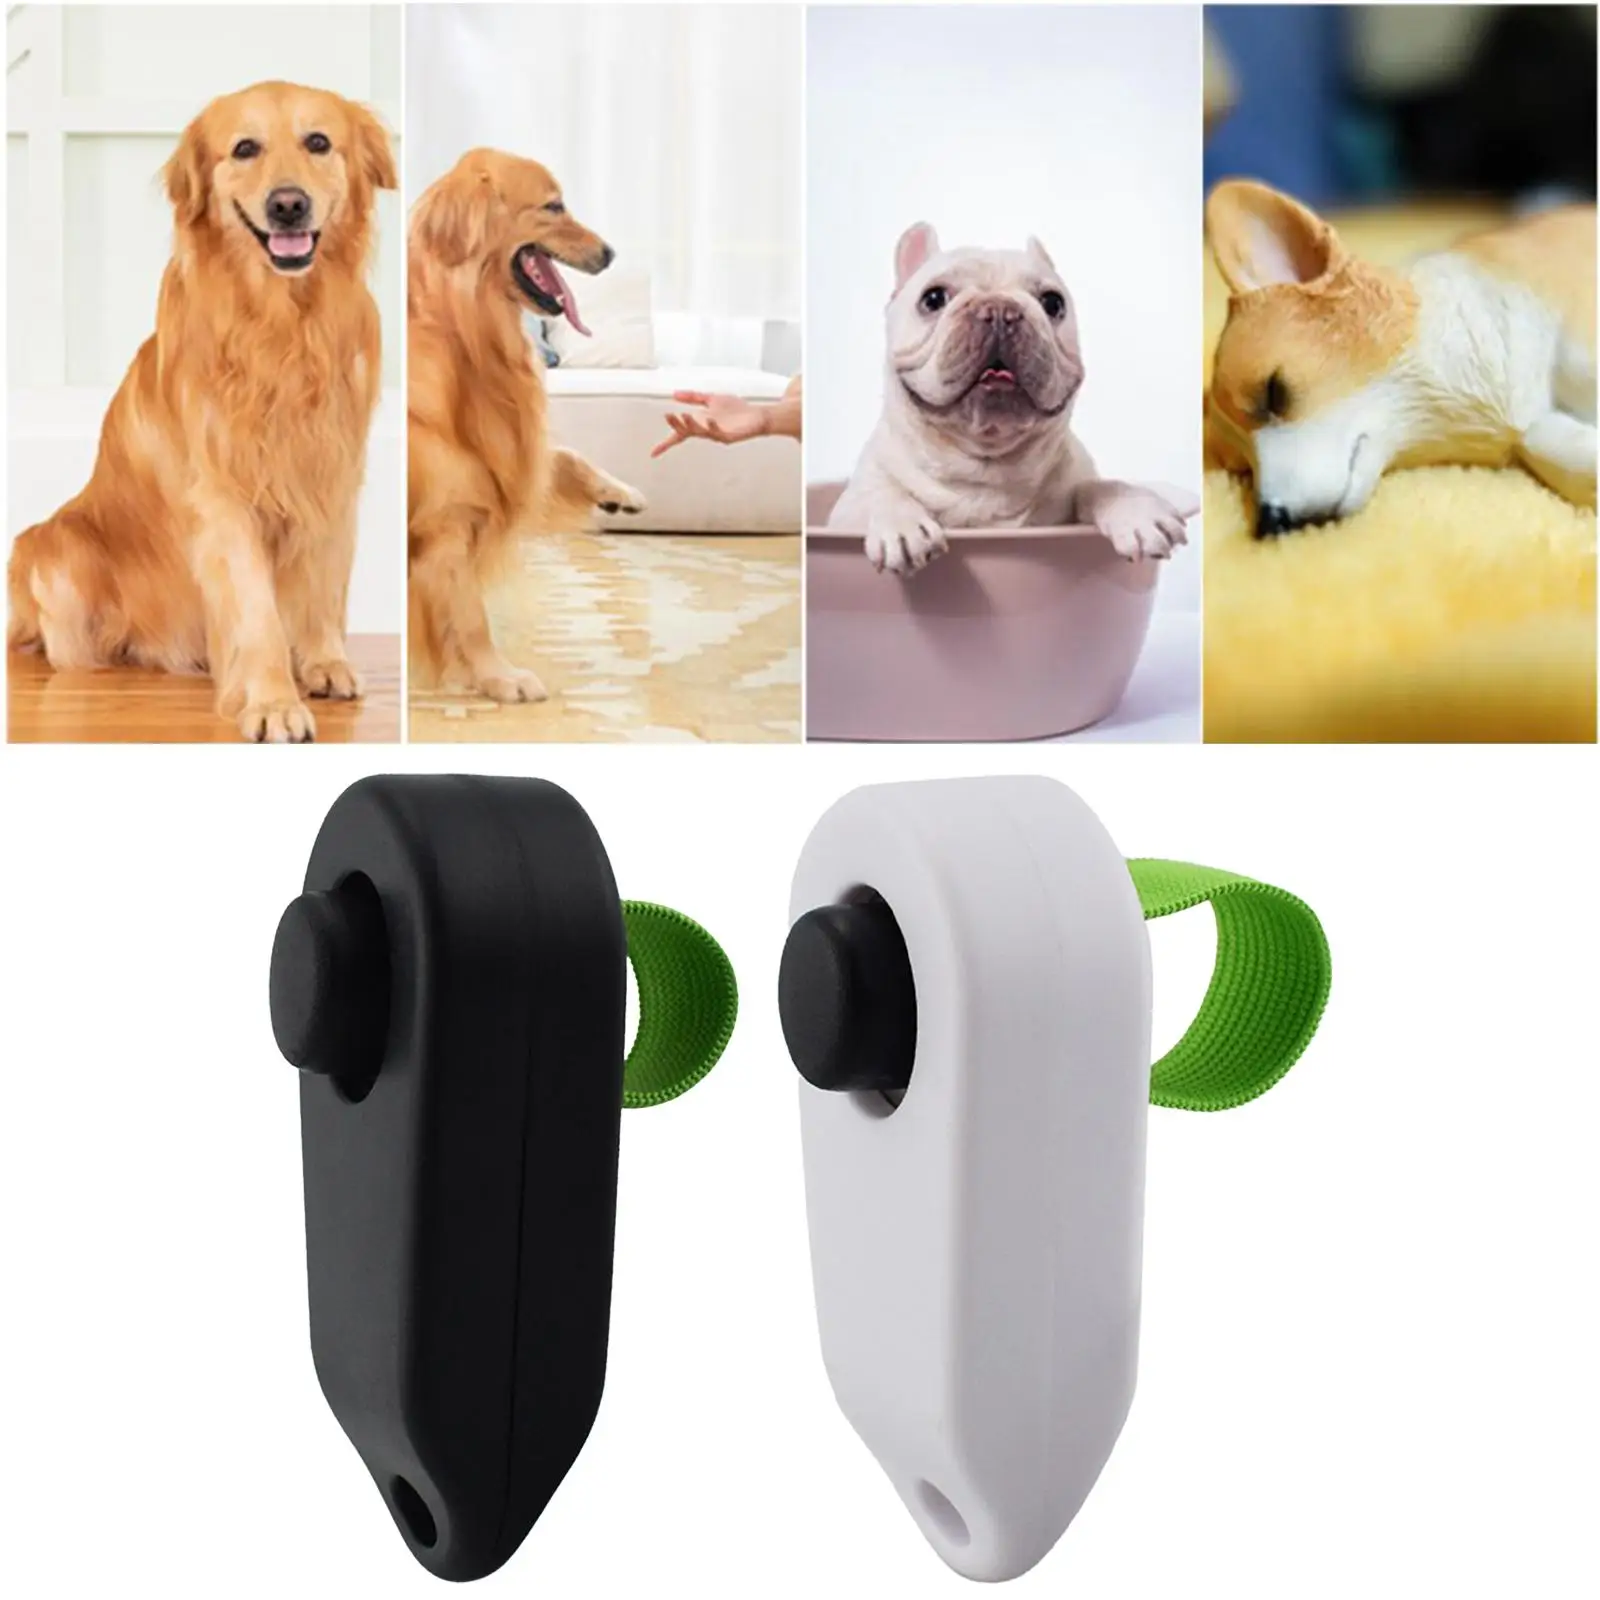 Dog Training Portable Dog Click Trainer Aid Tool Pet Training Click Sound, Guide Obedience Dog Supplies